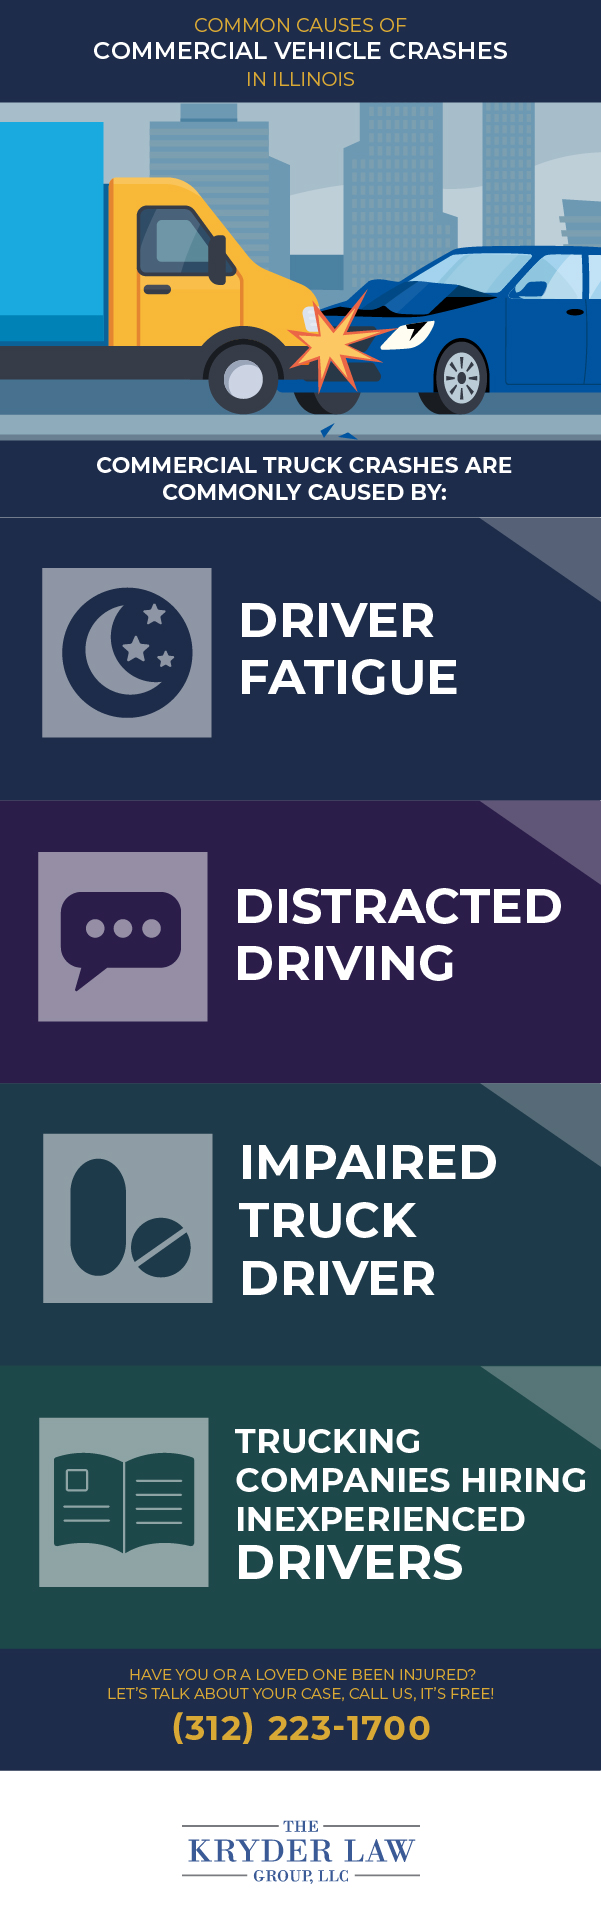 Common Causes of Commercial Vehicle Crashes Infographic